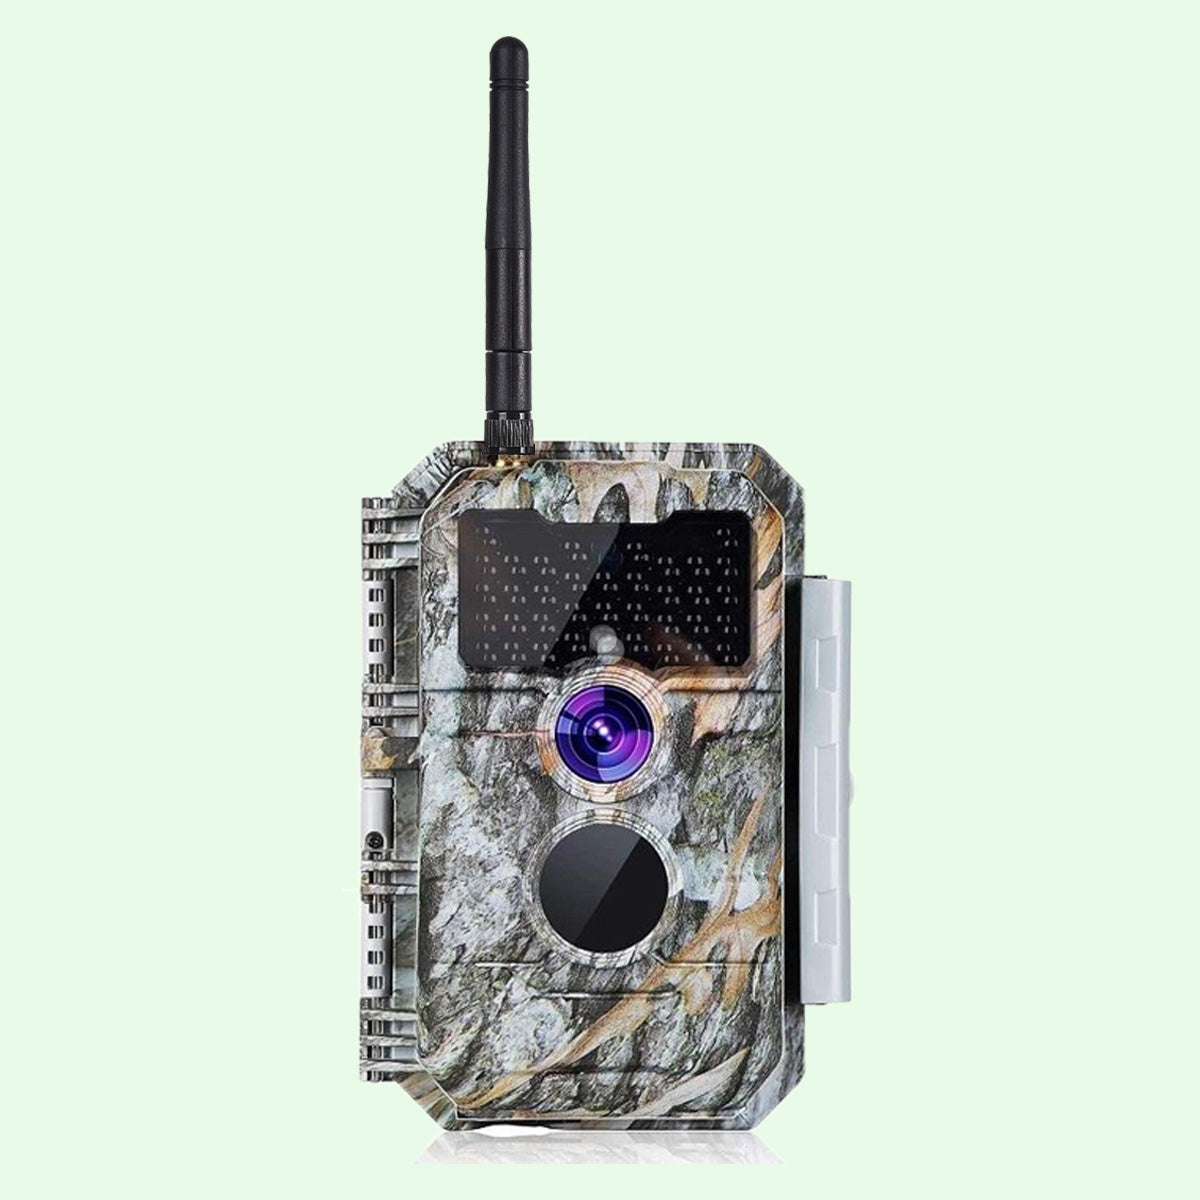 Wireless WiFi Wildlife Trail Camera with Night Vision Motion Activated 32MP 1296P Waterproof Stealth Camouflage for Hunting, Home Security 